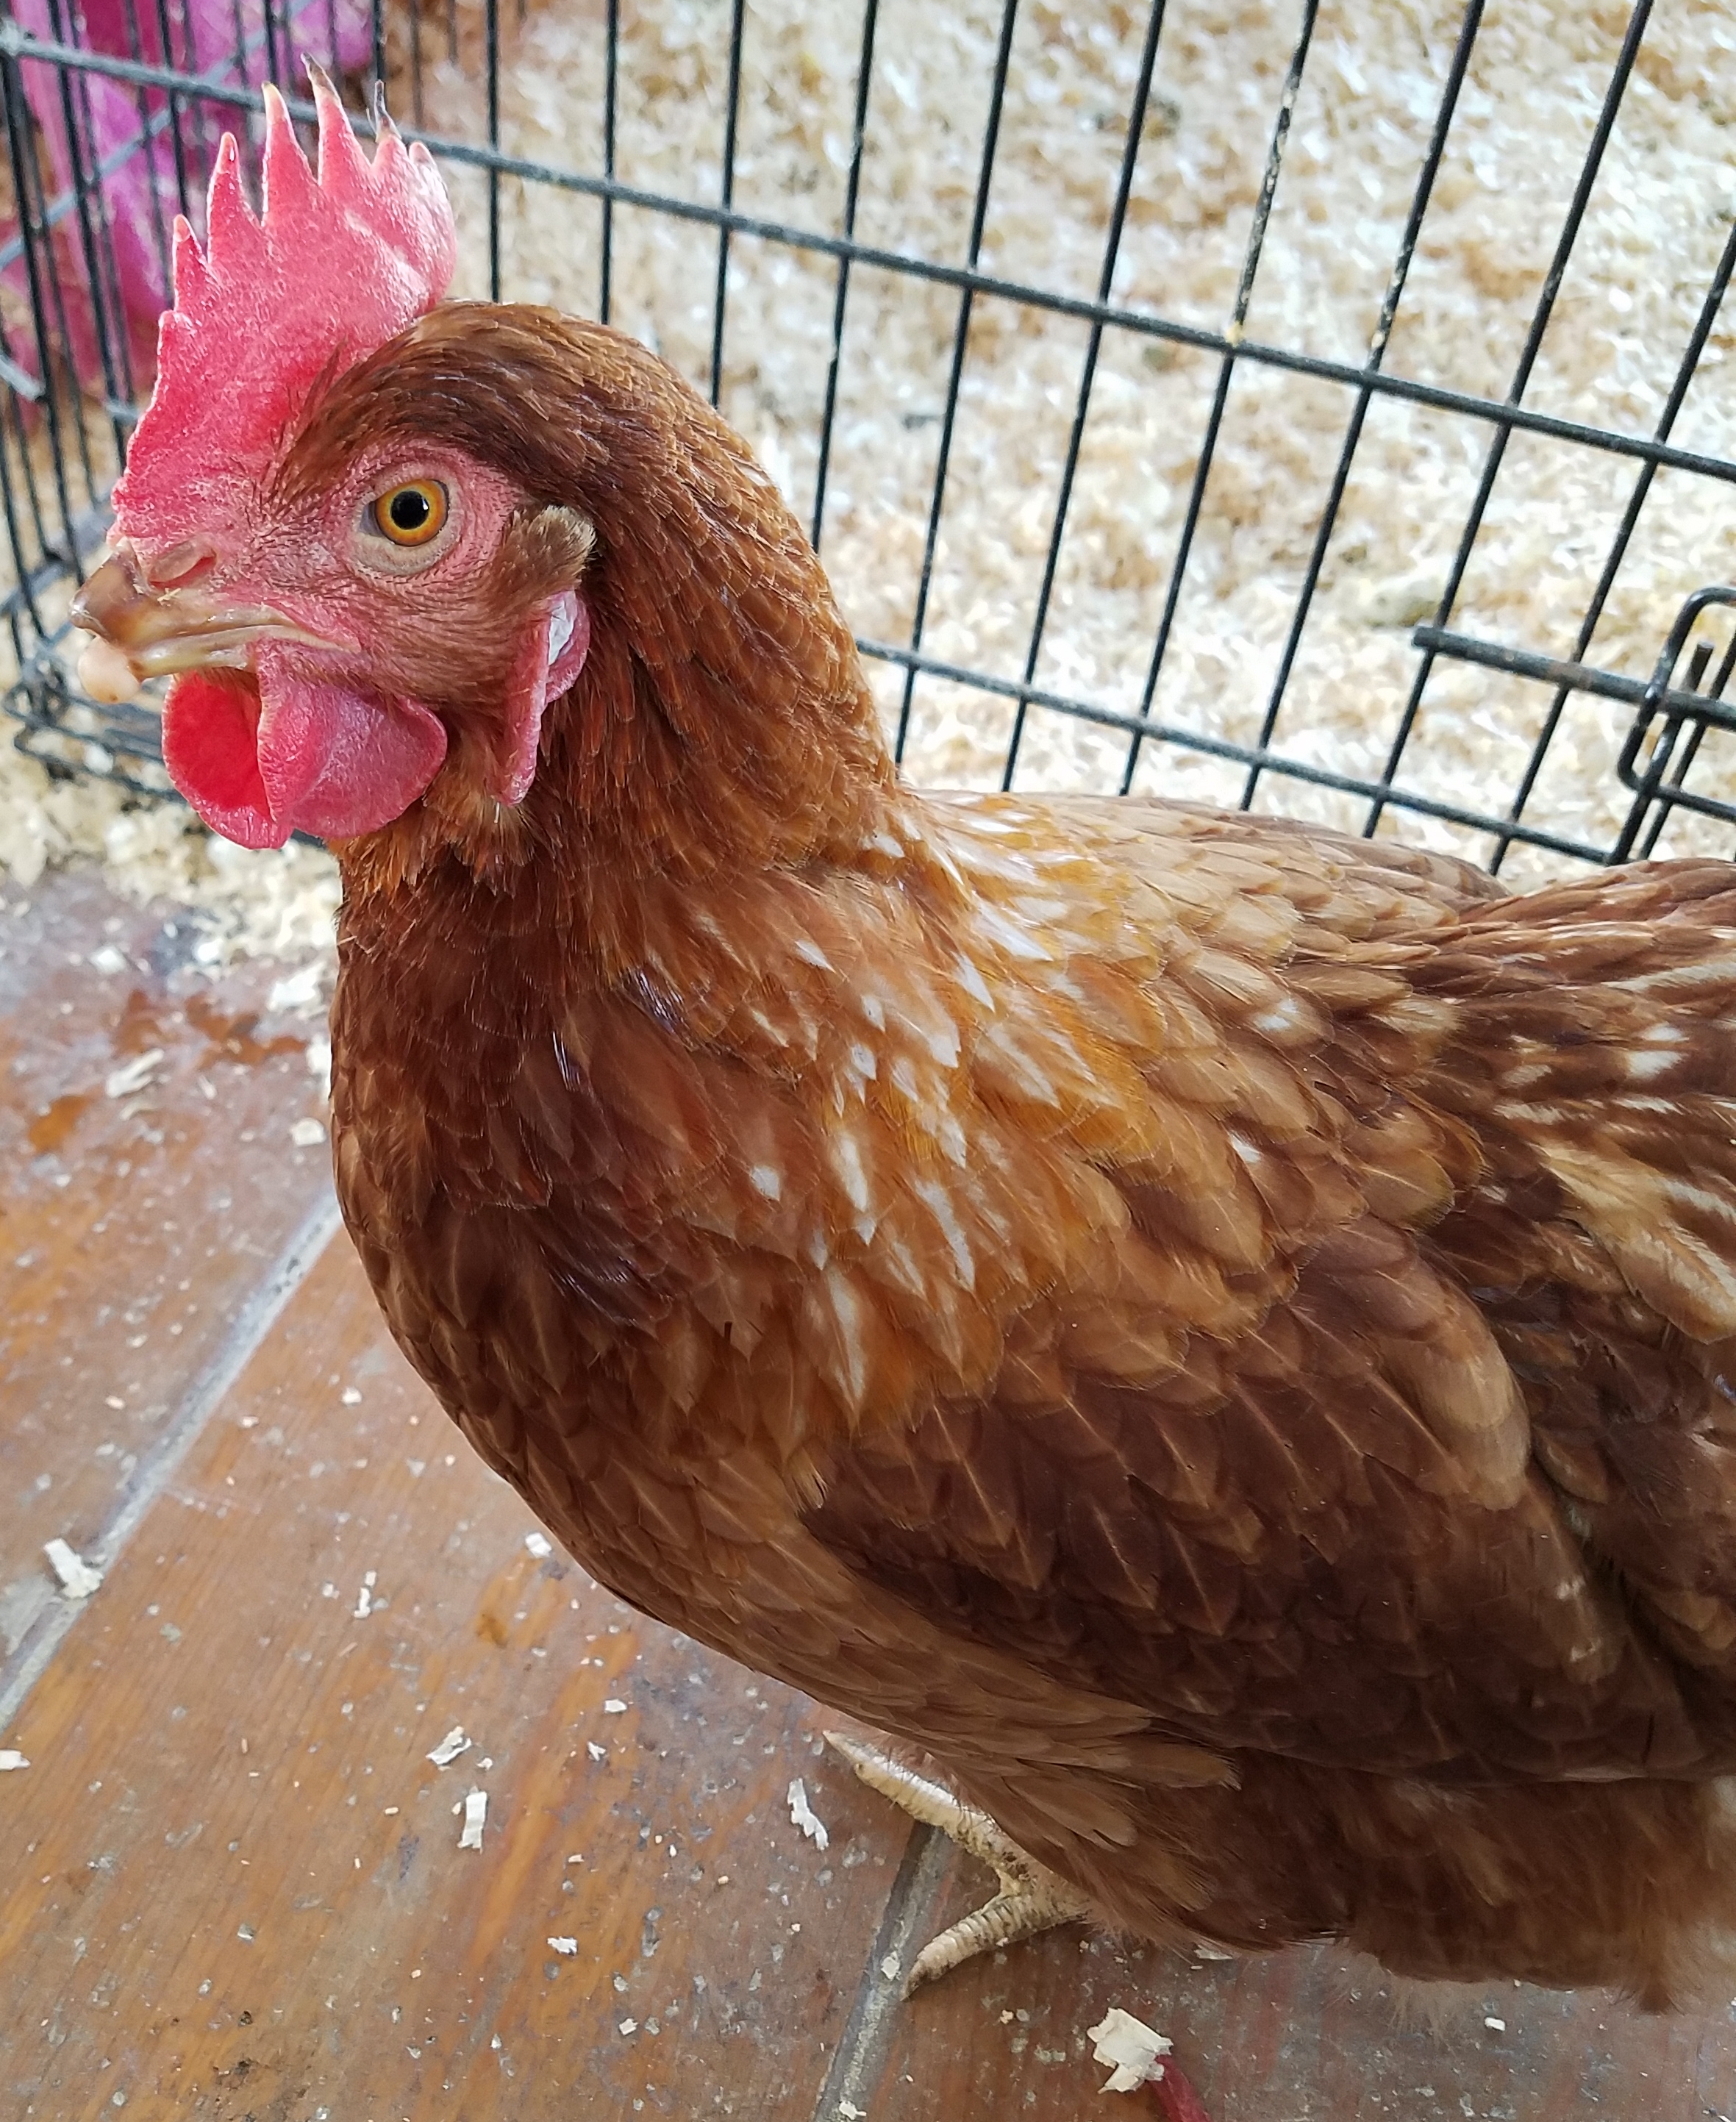 One of the three hens found wandering near the Poly Prep Campus in December 2017. Photo courtesy of Mia Sacilotto. 